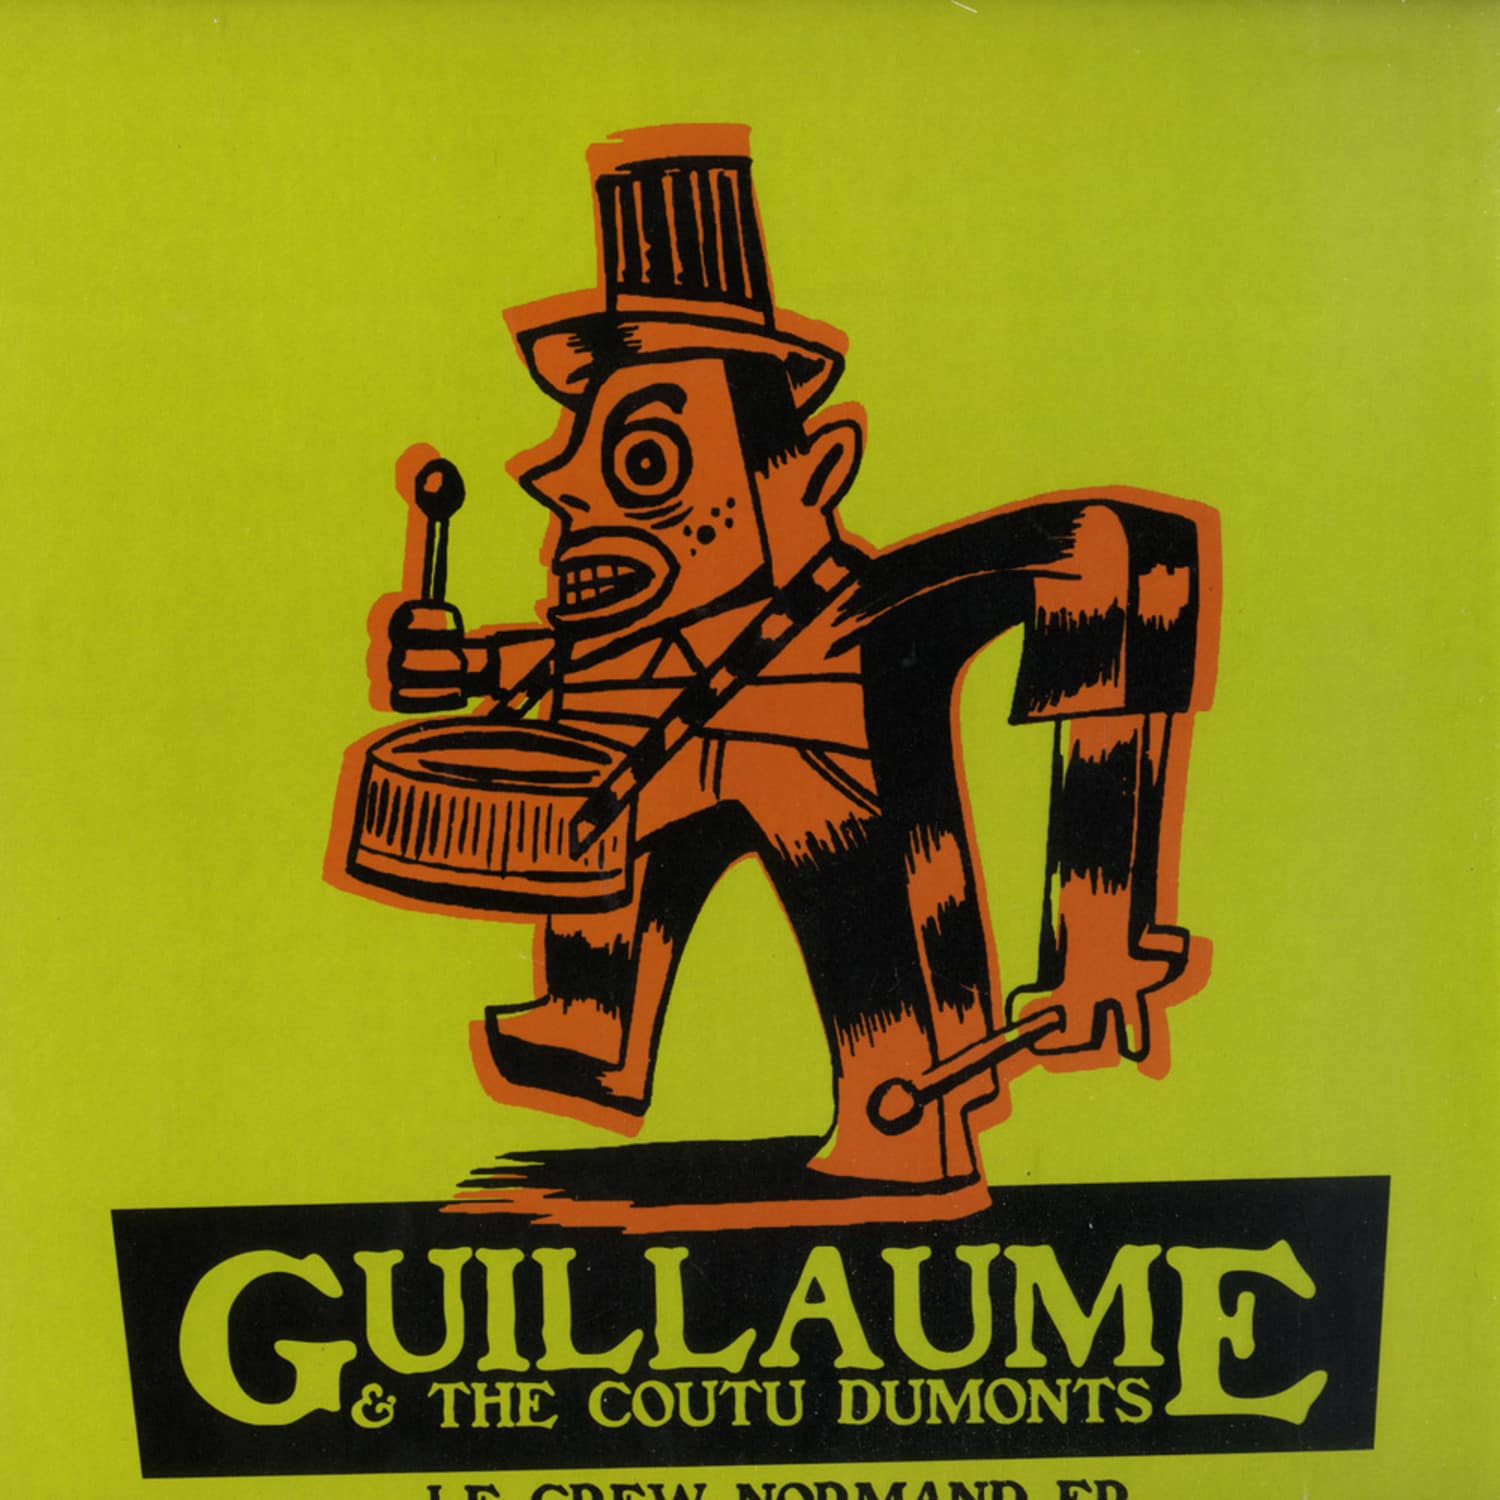 Guillaume & The Coutu Dumonts - LE CREW NORMAND